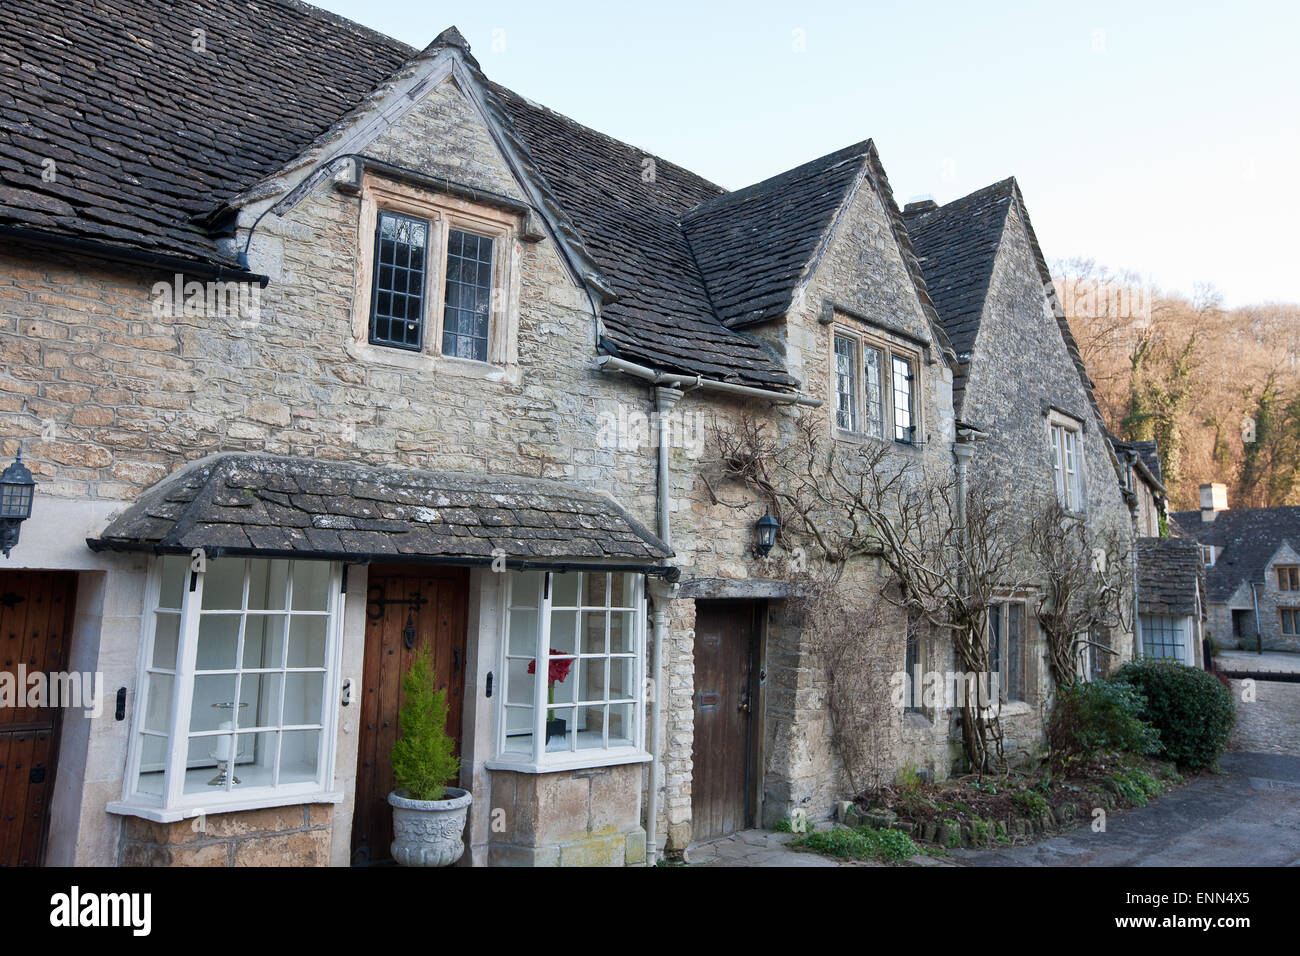 Pretty quaint village of Castle Combe, Wiltshire,England. Steven Spielberg used village as setting for movie War Horse. Stock Photo